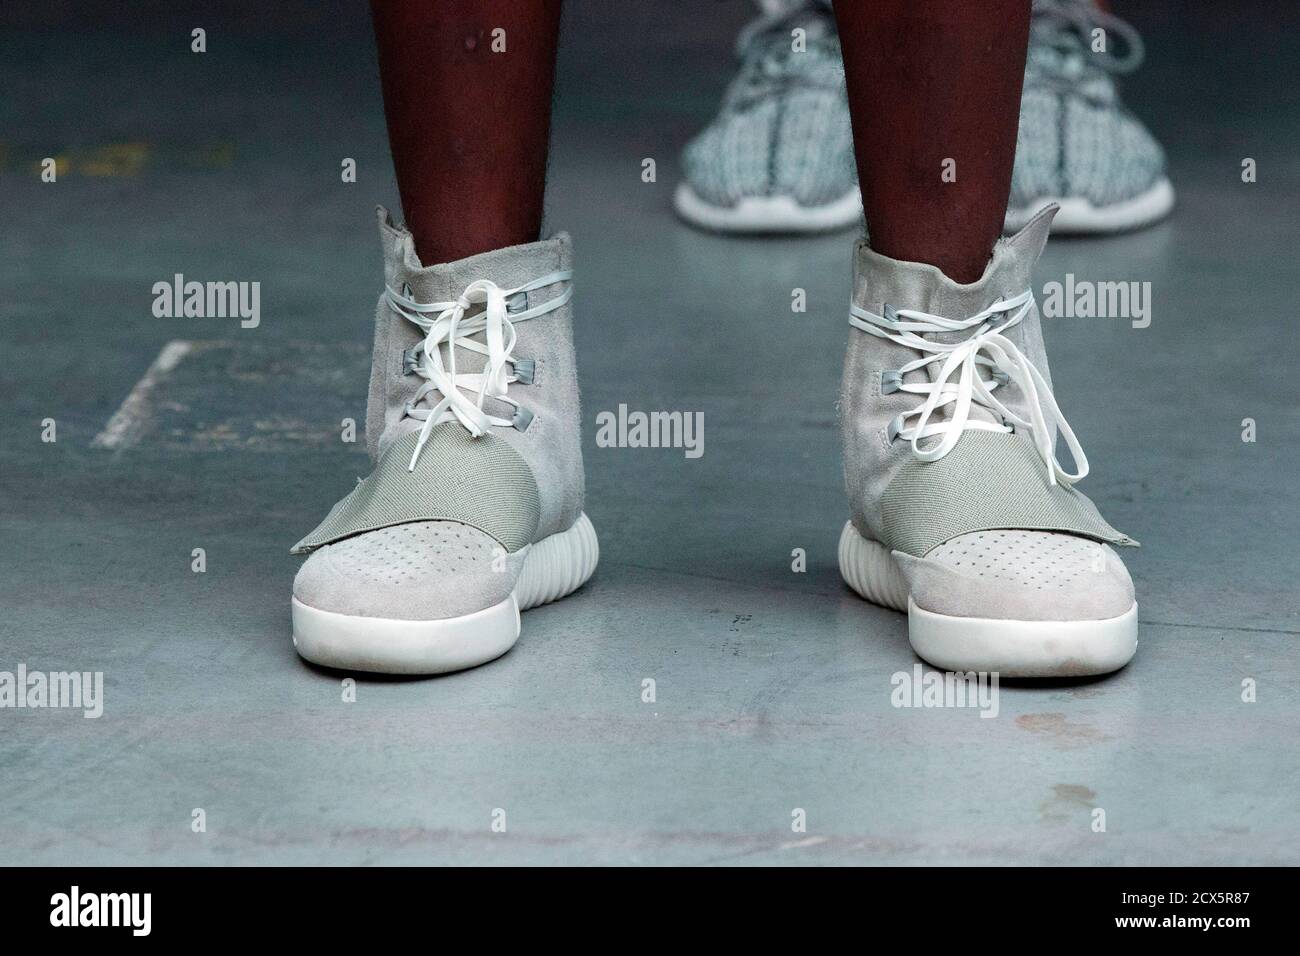 A model wears a pair of Adidas Yeezy 750 Boost shoes designed by Kanye West  as part of his Fall/Winter 2015 partnership line with Adidas at New York  Fashion Week February 12,